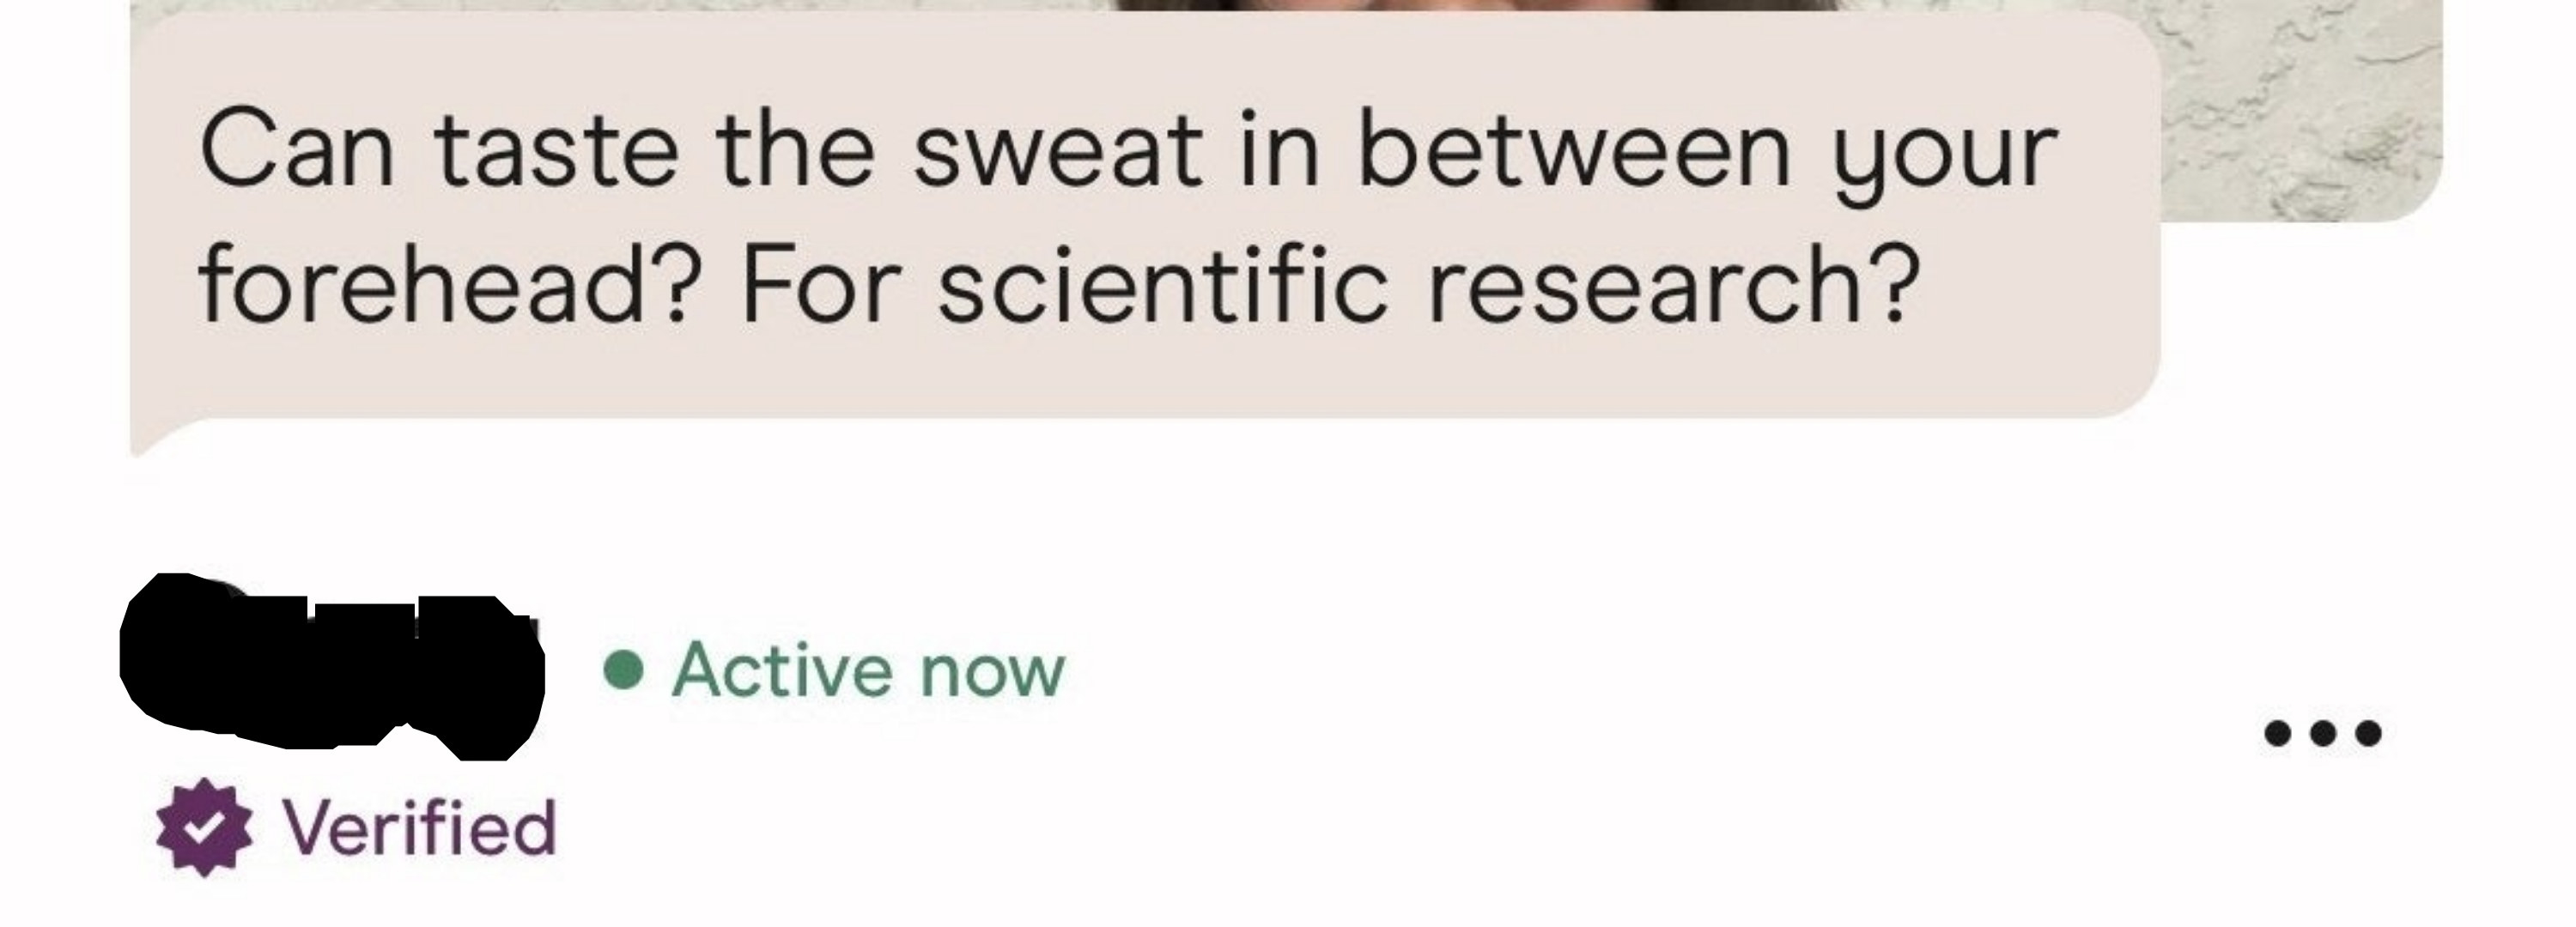 man responds to photo saying, can i taste the sweat in between your forehead for scientific research?